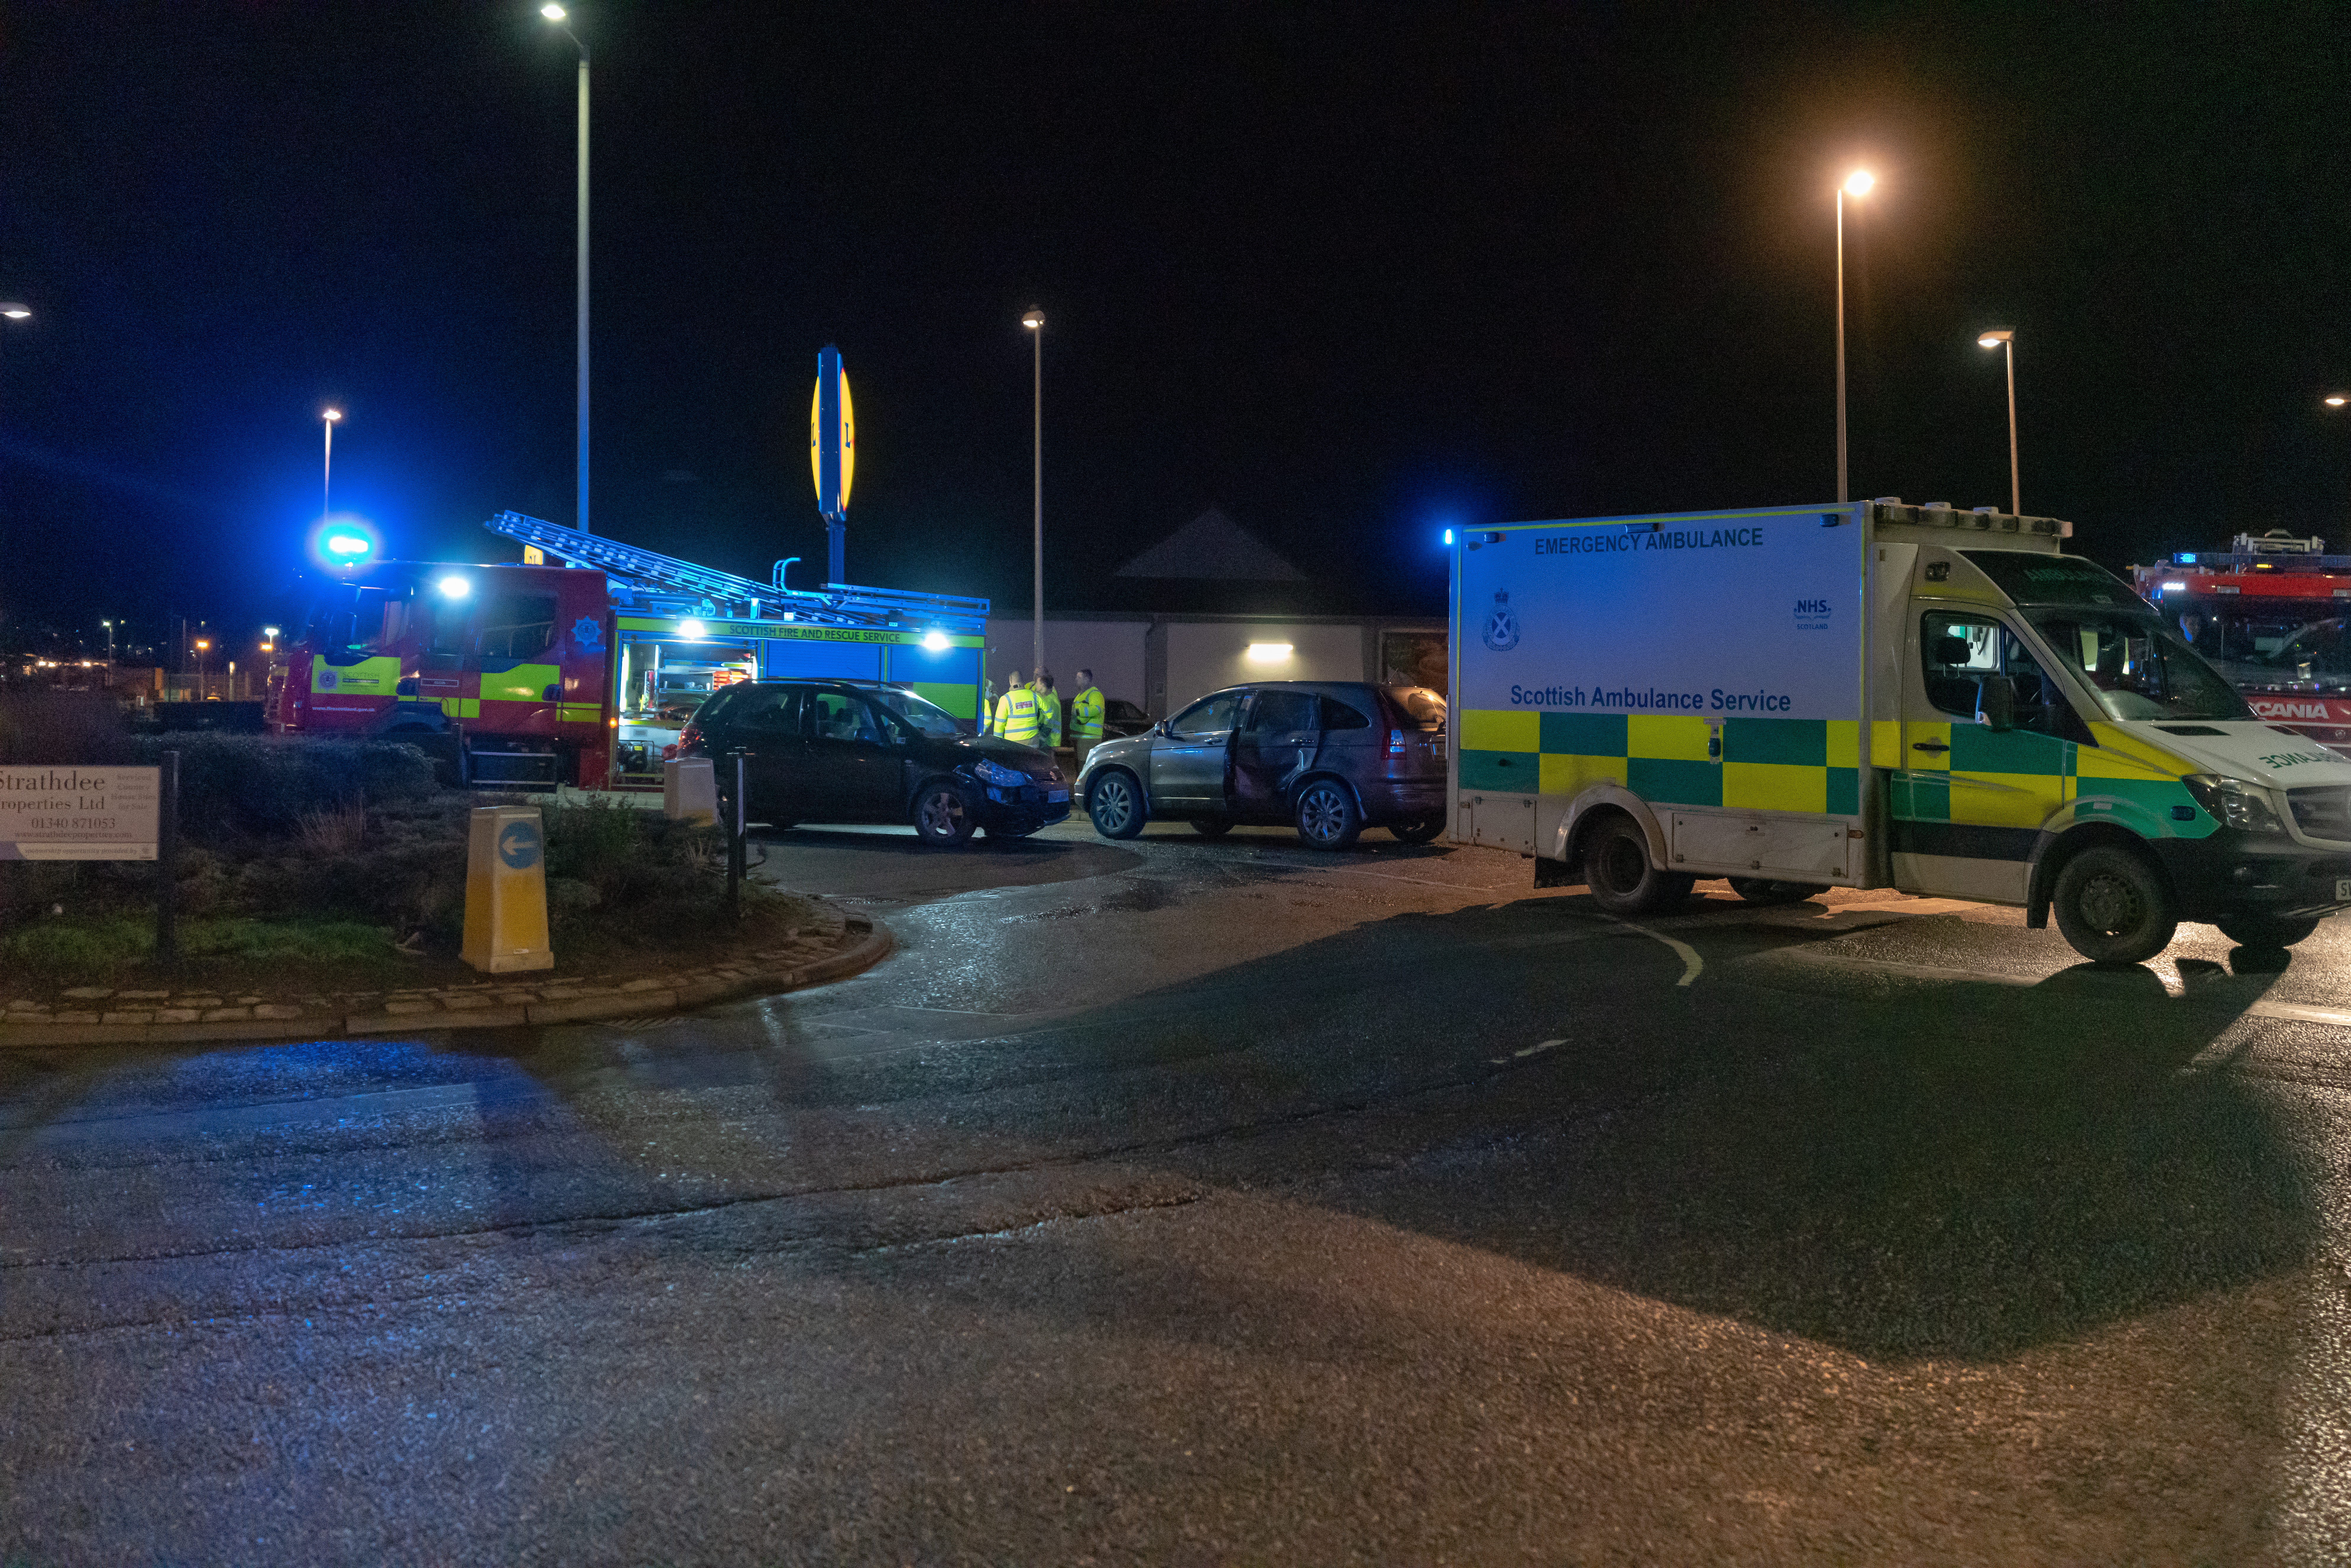 This is the scne of the RTC on the Roundabout outside the Laichmoray Hotel, Elgin, Moray involving 2 vehicles, a Honda CRV and a Suzuki SX4. Photographed by JASPERIMAGE ©